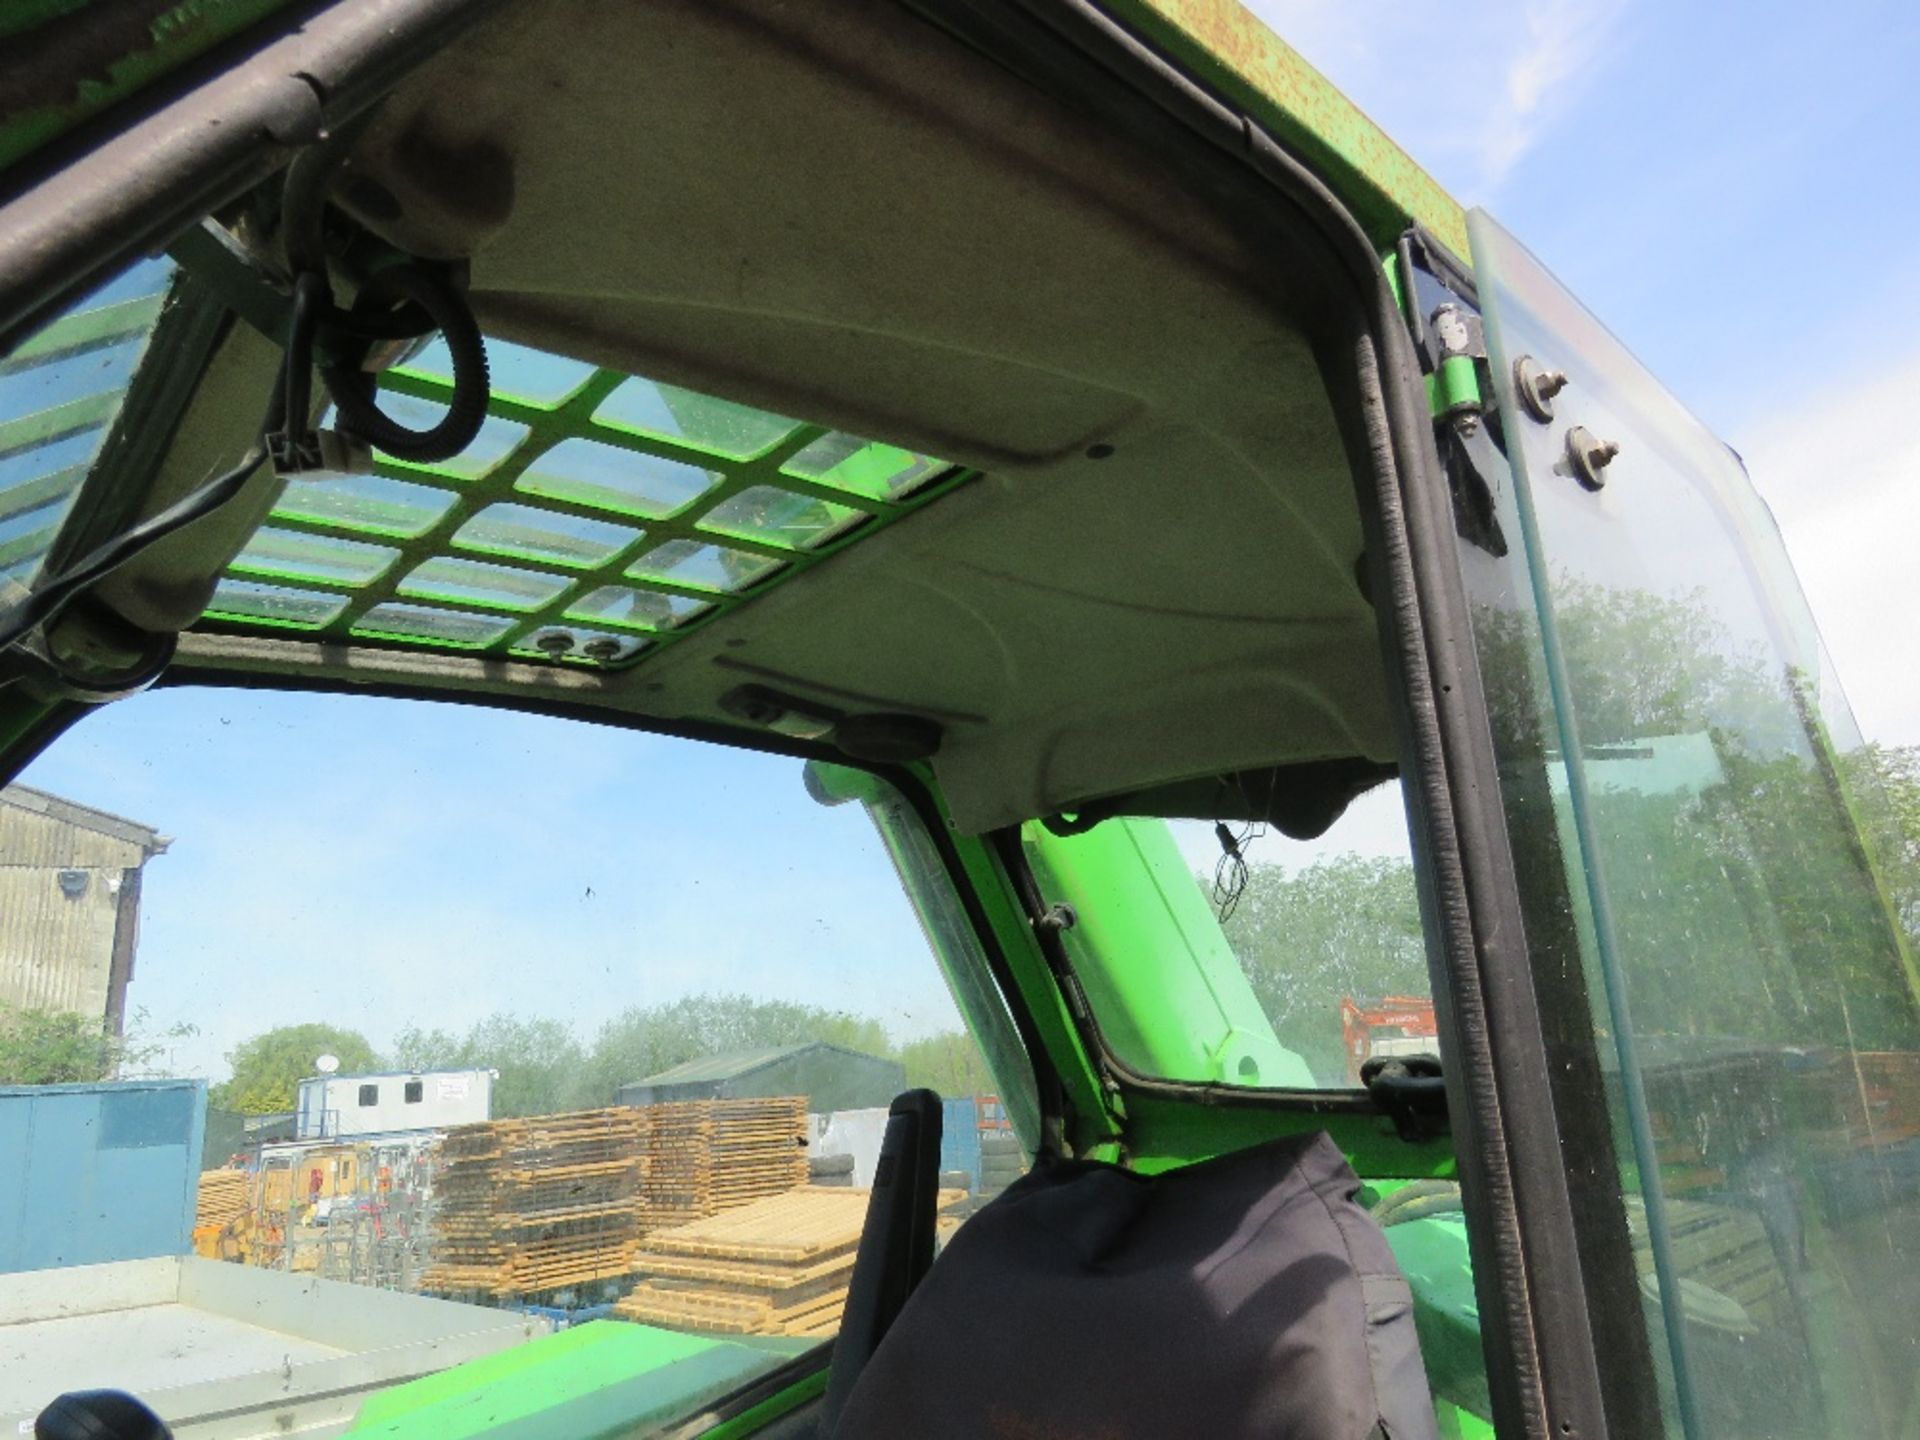 MERLO PANORAMIC P28.7 AGRI SPEC TELESCOPIC HANDLER, YEAR 2004 BUILD. 9764 REC HOURS. WHEN TESTED WAS - Image 12 of 13